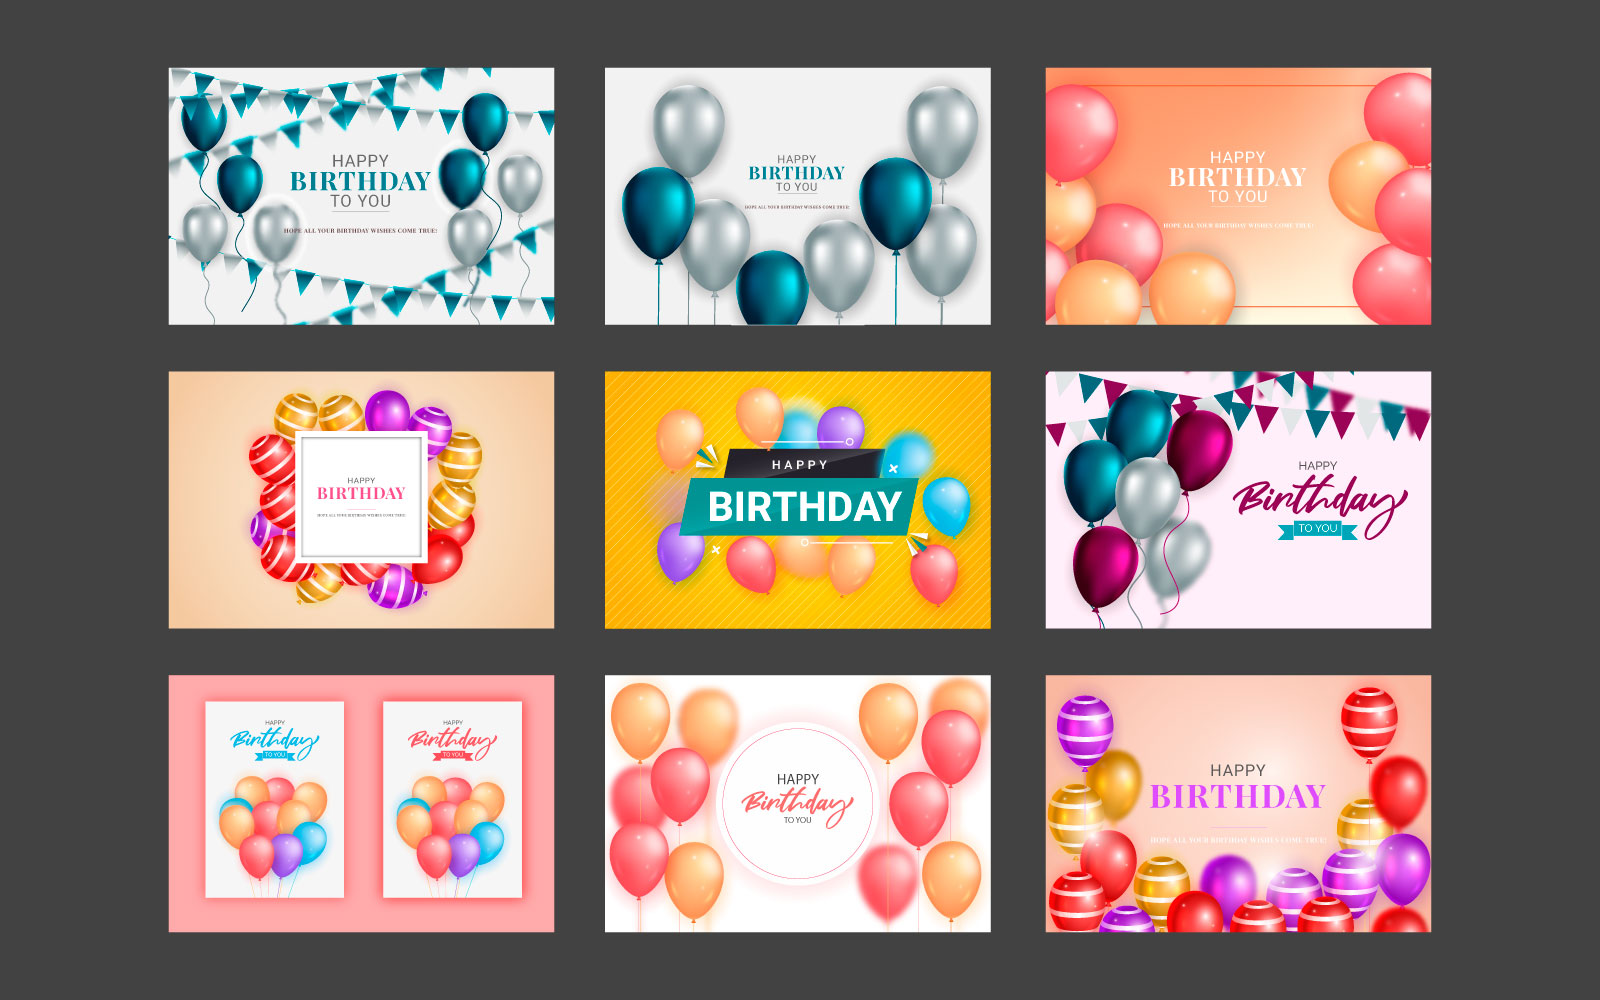 Birthday  banner template set. Happy birthday to you text in white space background